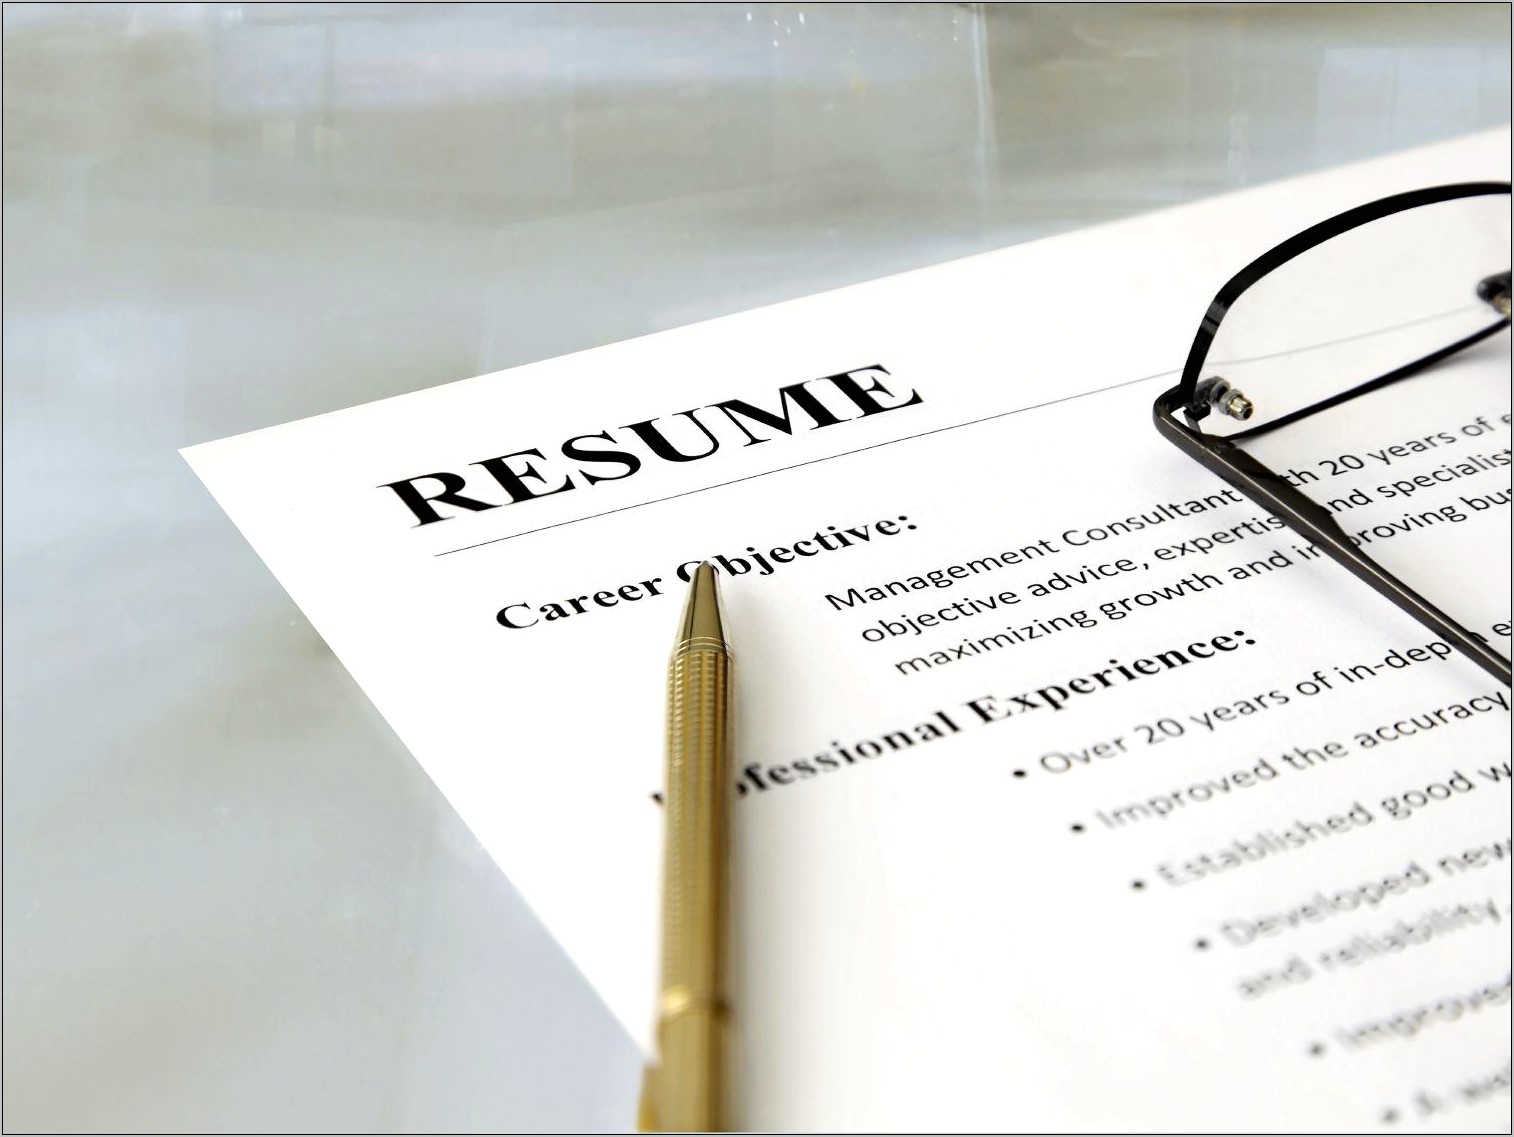 Good Objective Statements On Resume